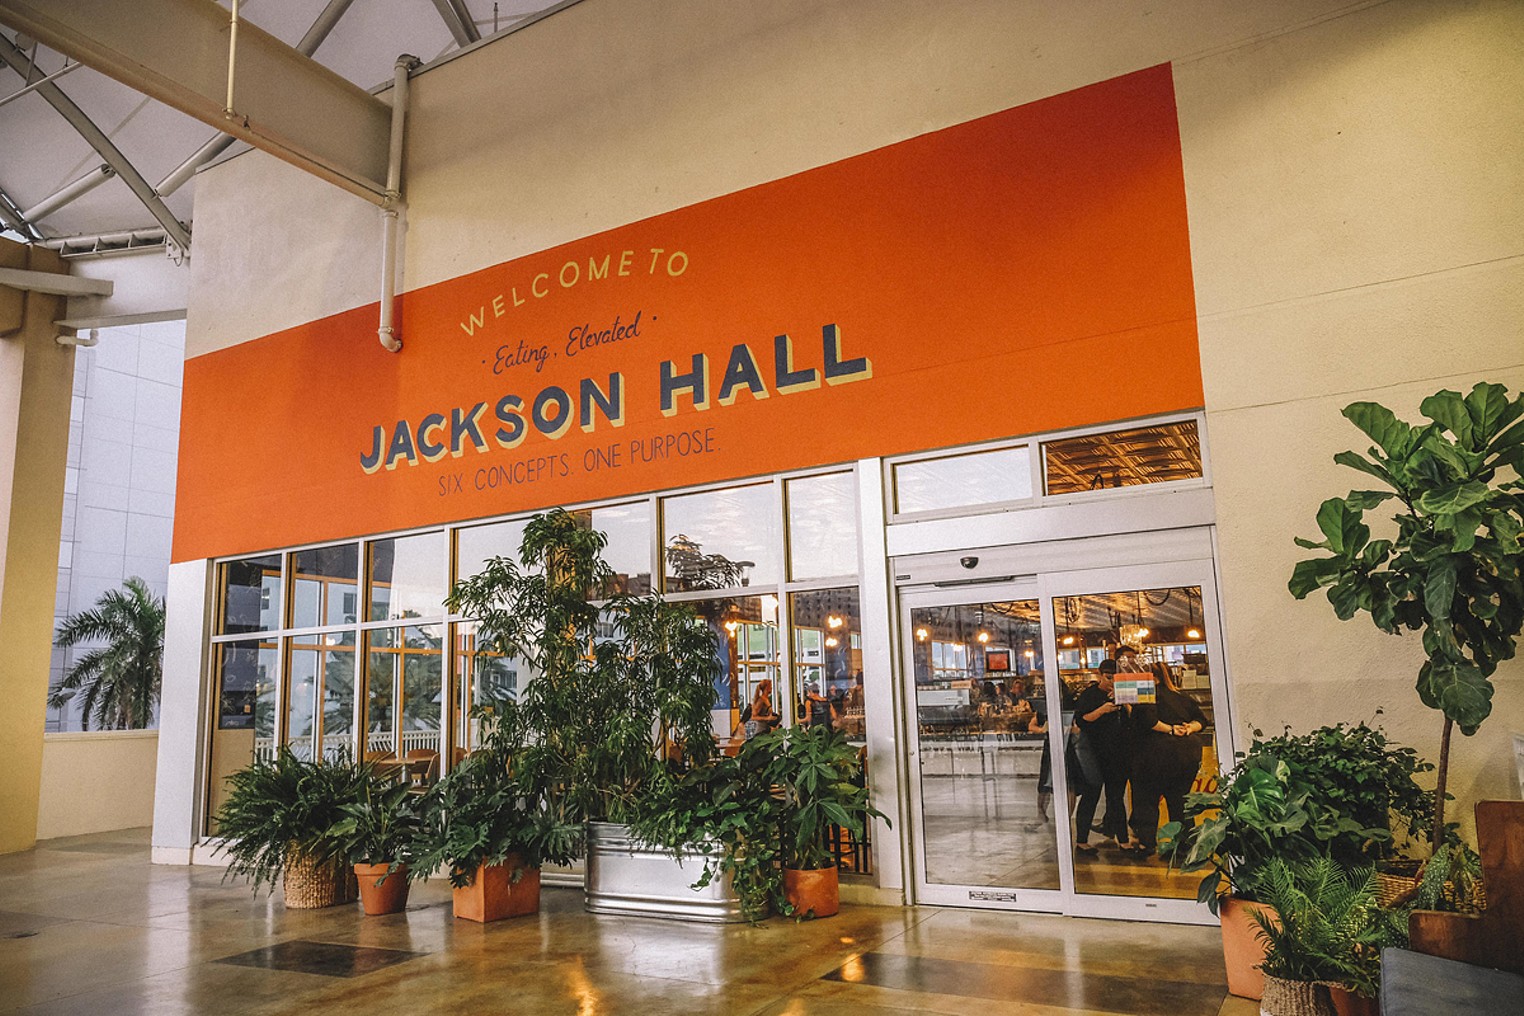 Aventura Mall Announces its Food Hall Lineup - Eater Miami